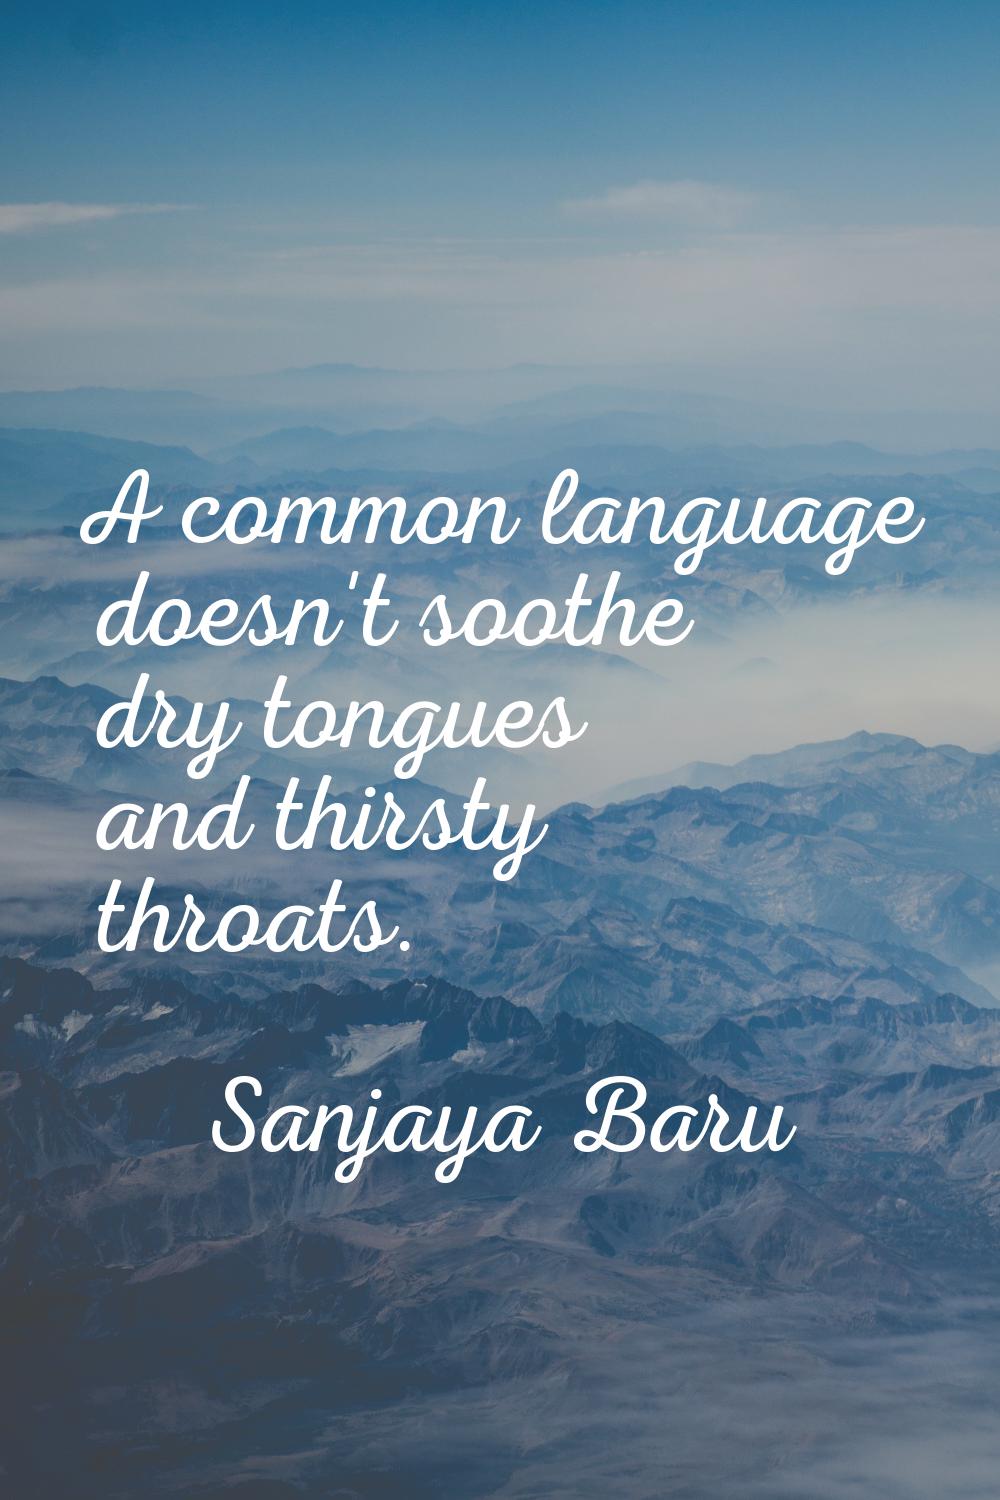 A common language doesn't soothe dry tongues and thirsty throats.